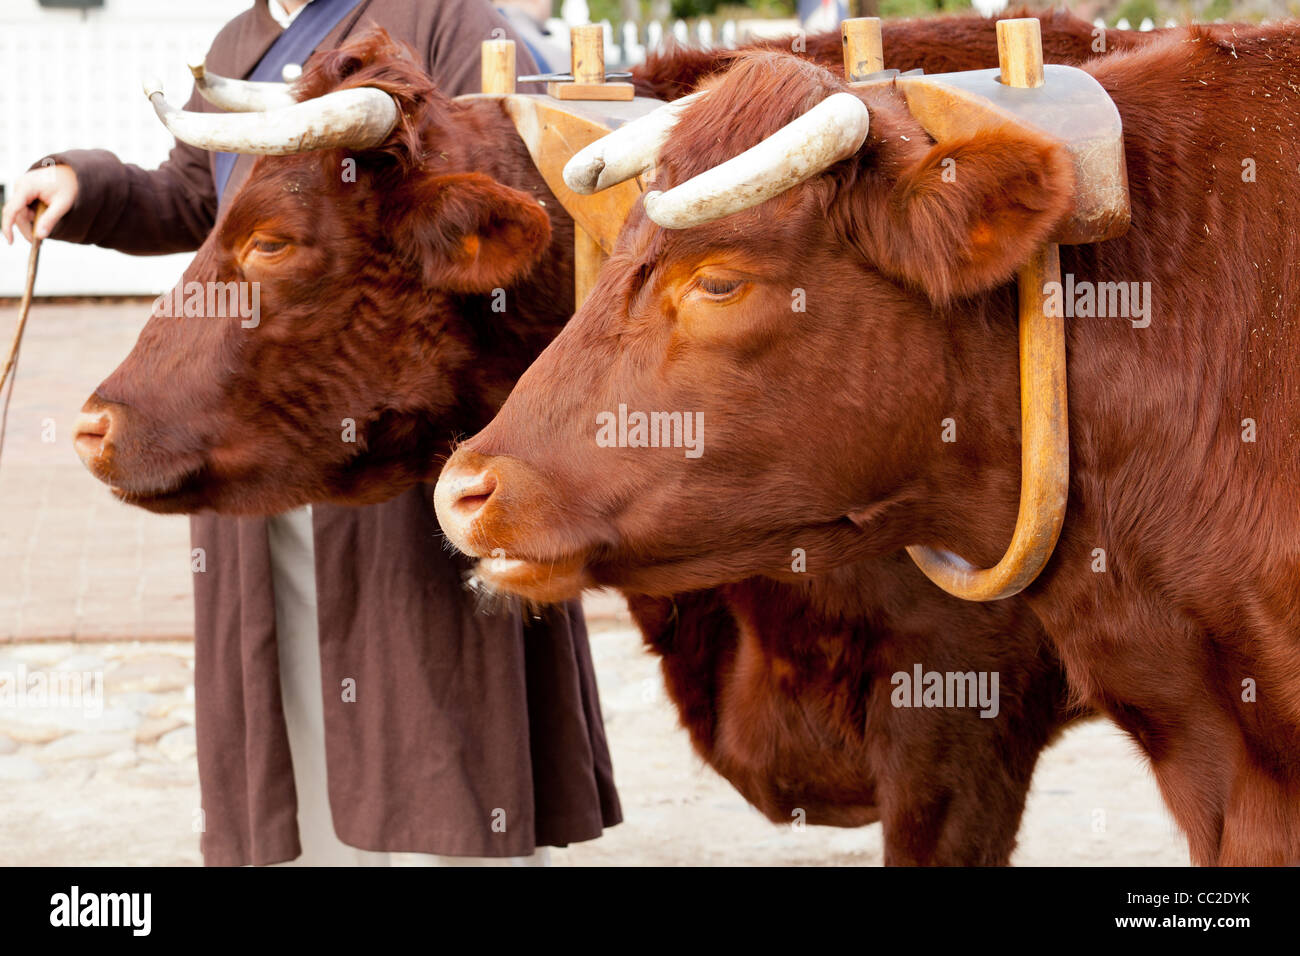 Pair of oxen in a wooden yoke for pulling cart or machinery Stock Photo